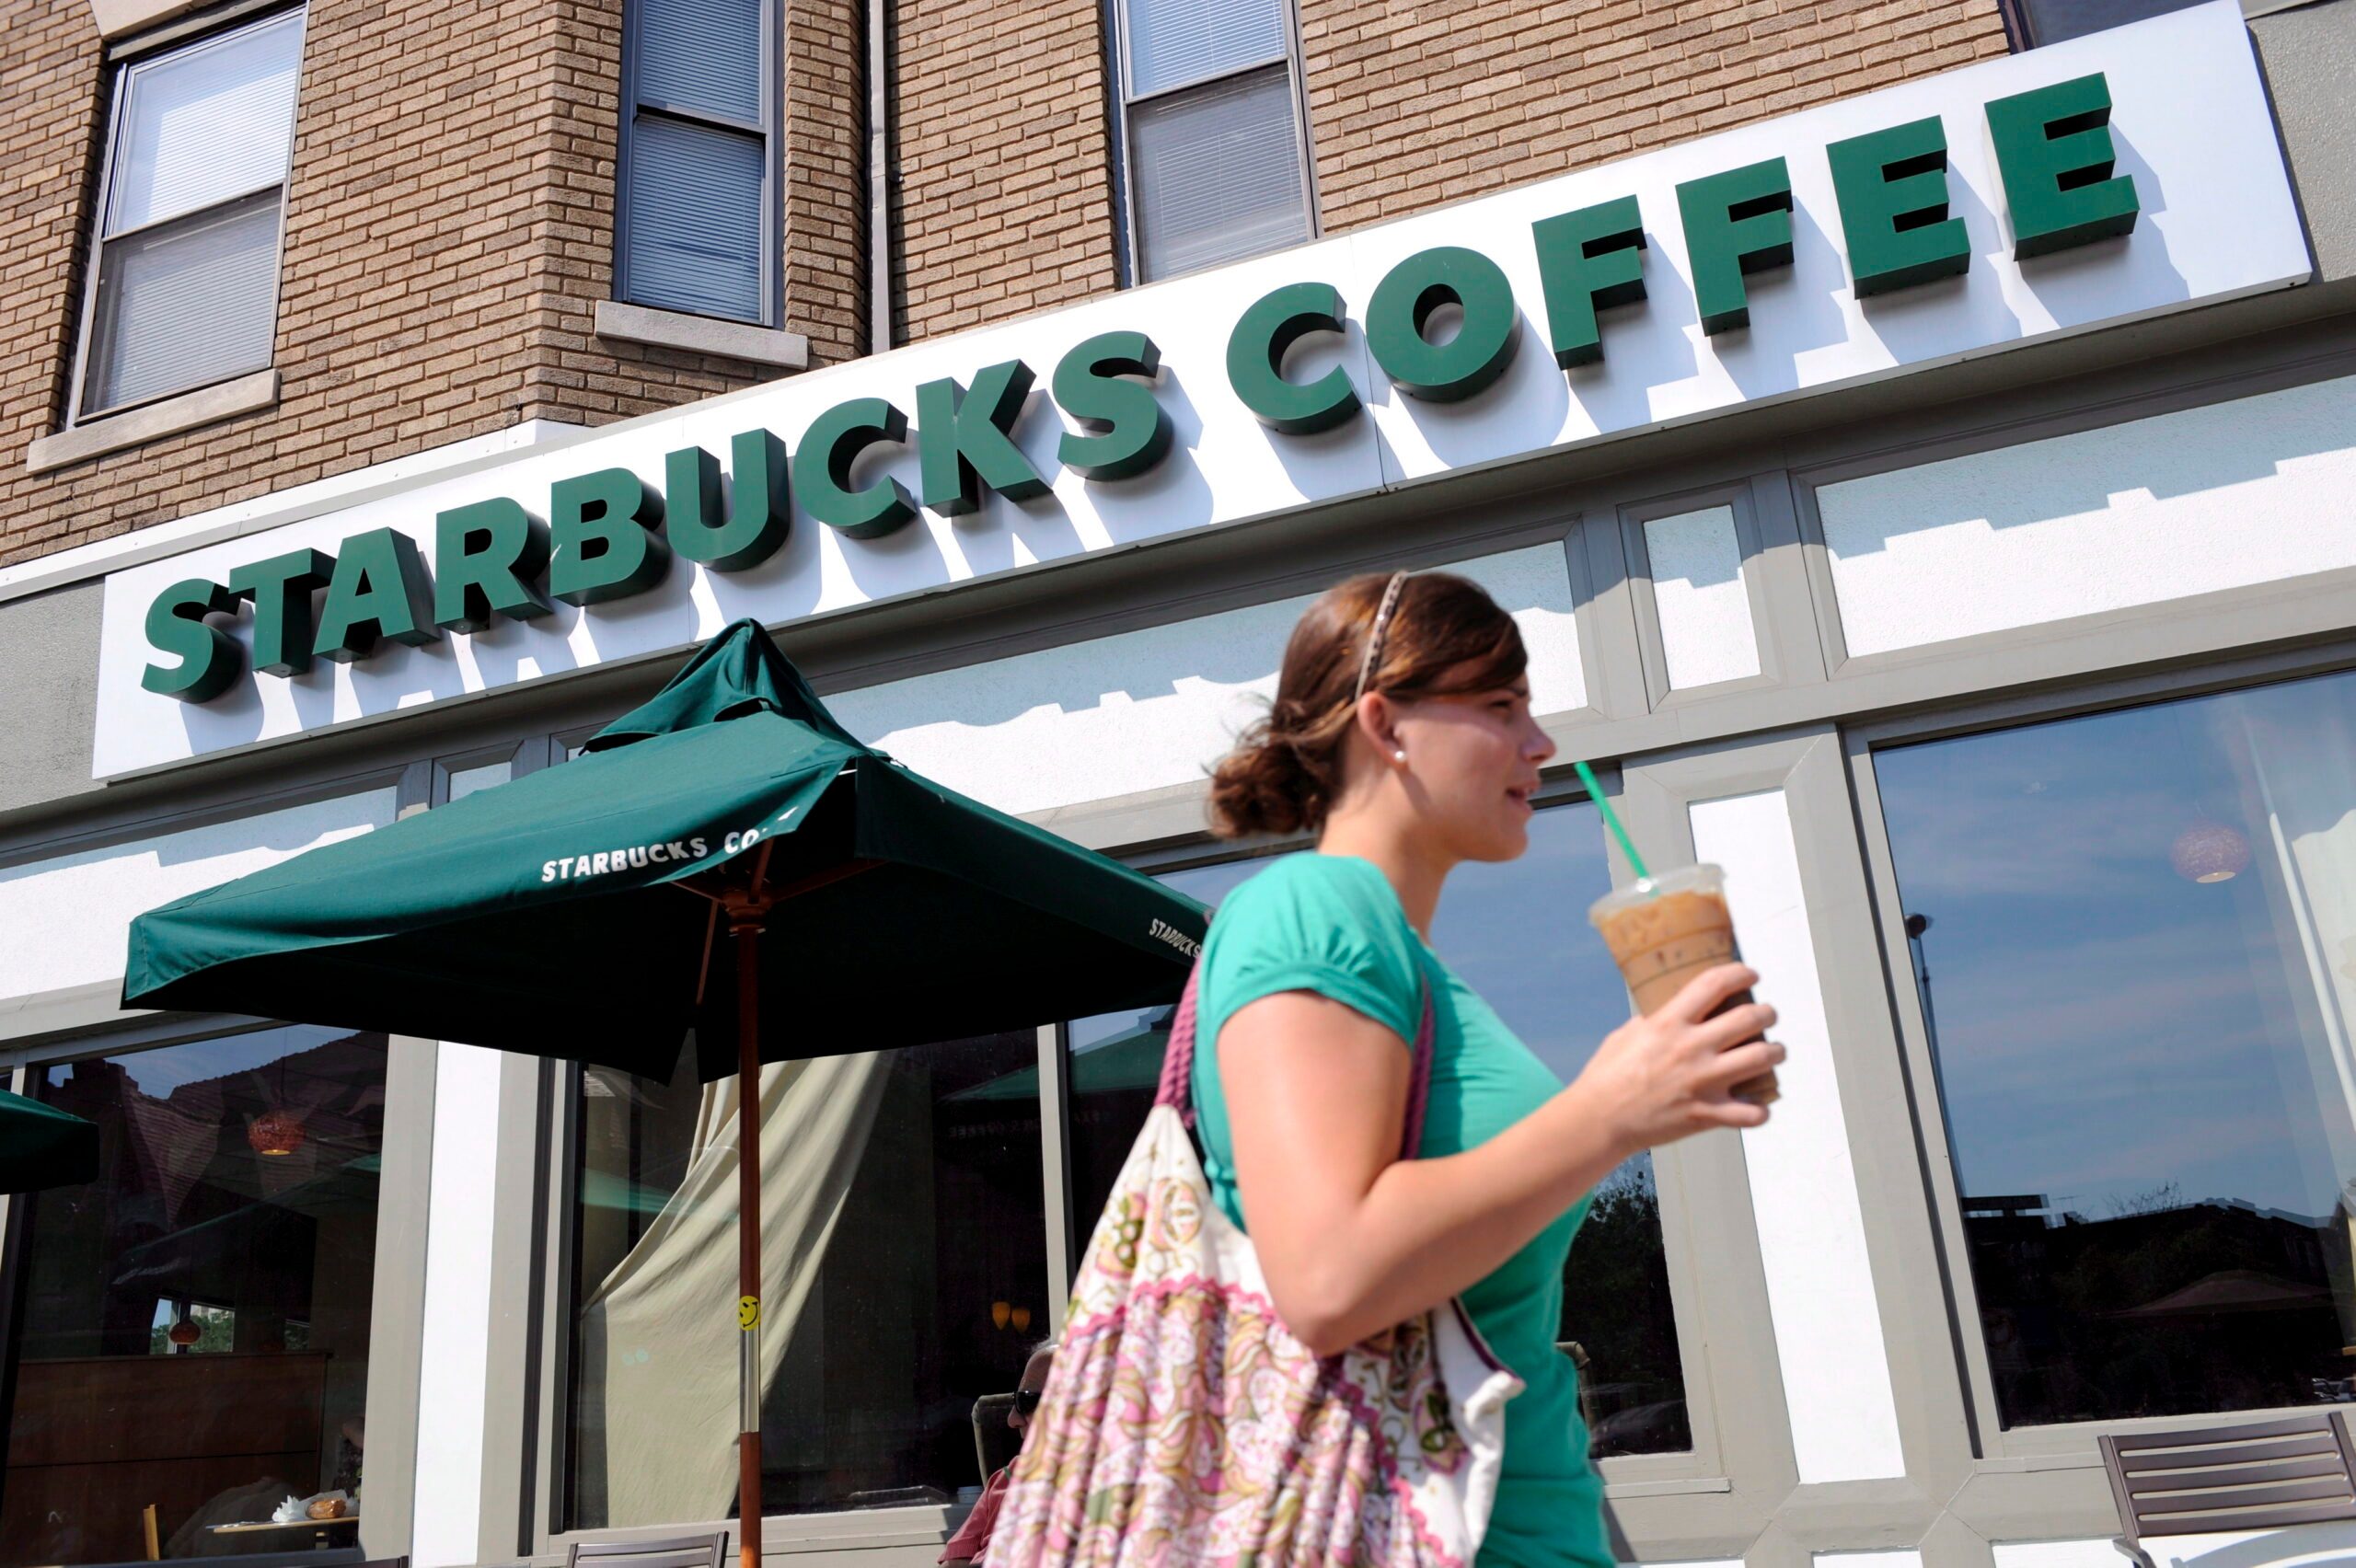 US woman sues Starbucks for $5M over ice in cold drinks